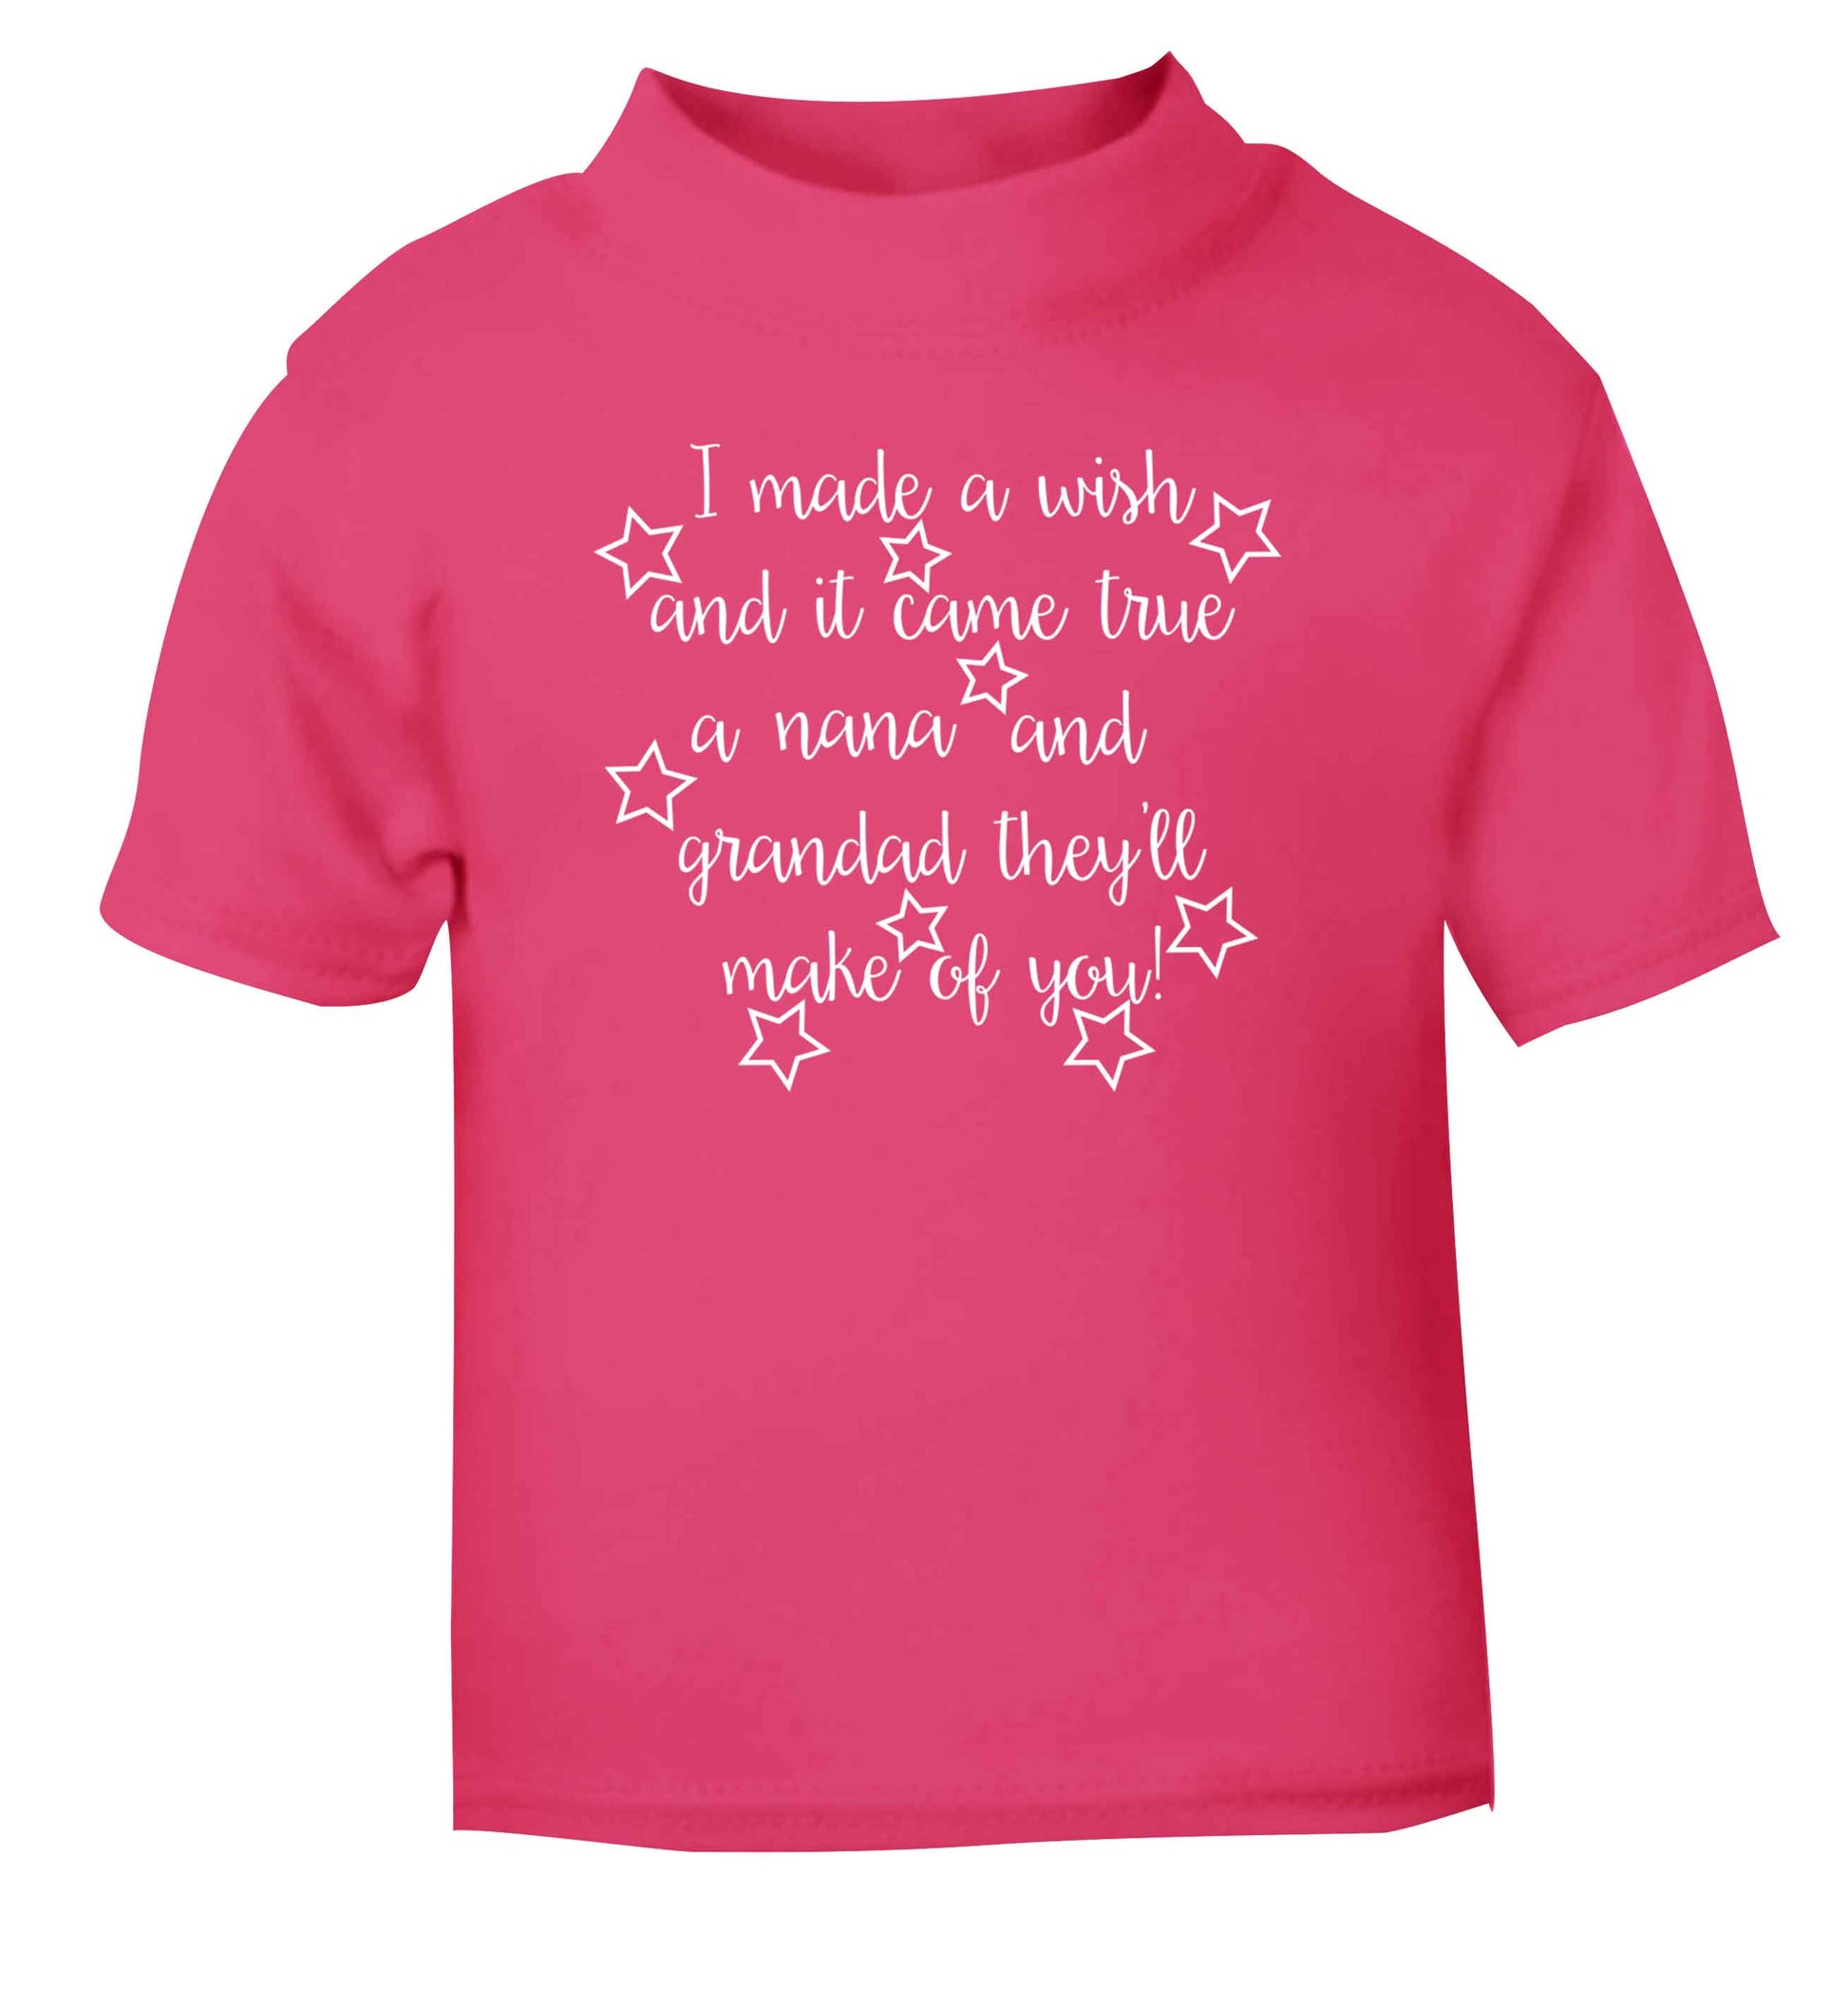 I made a wish and it came true a nana and grandad they'll make of you! pink Baby Toddler Tshirt 2 Years